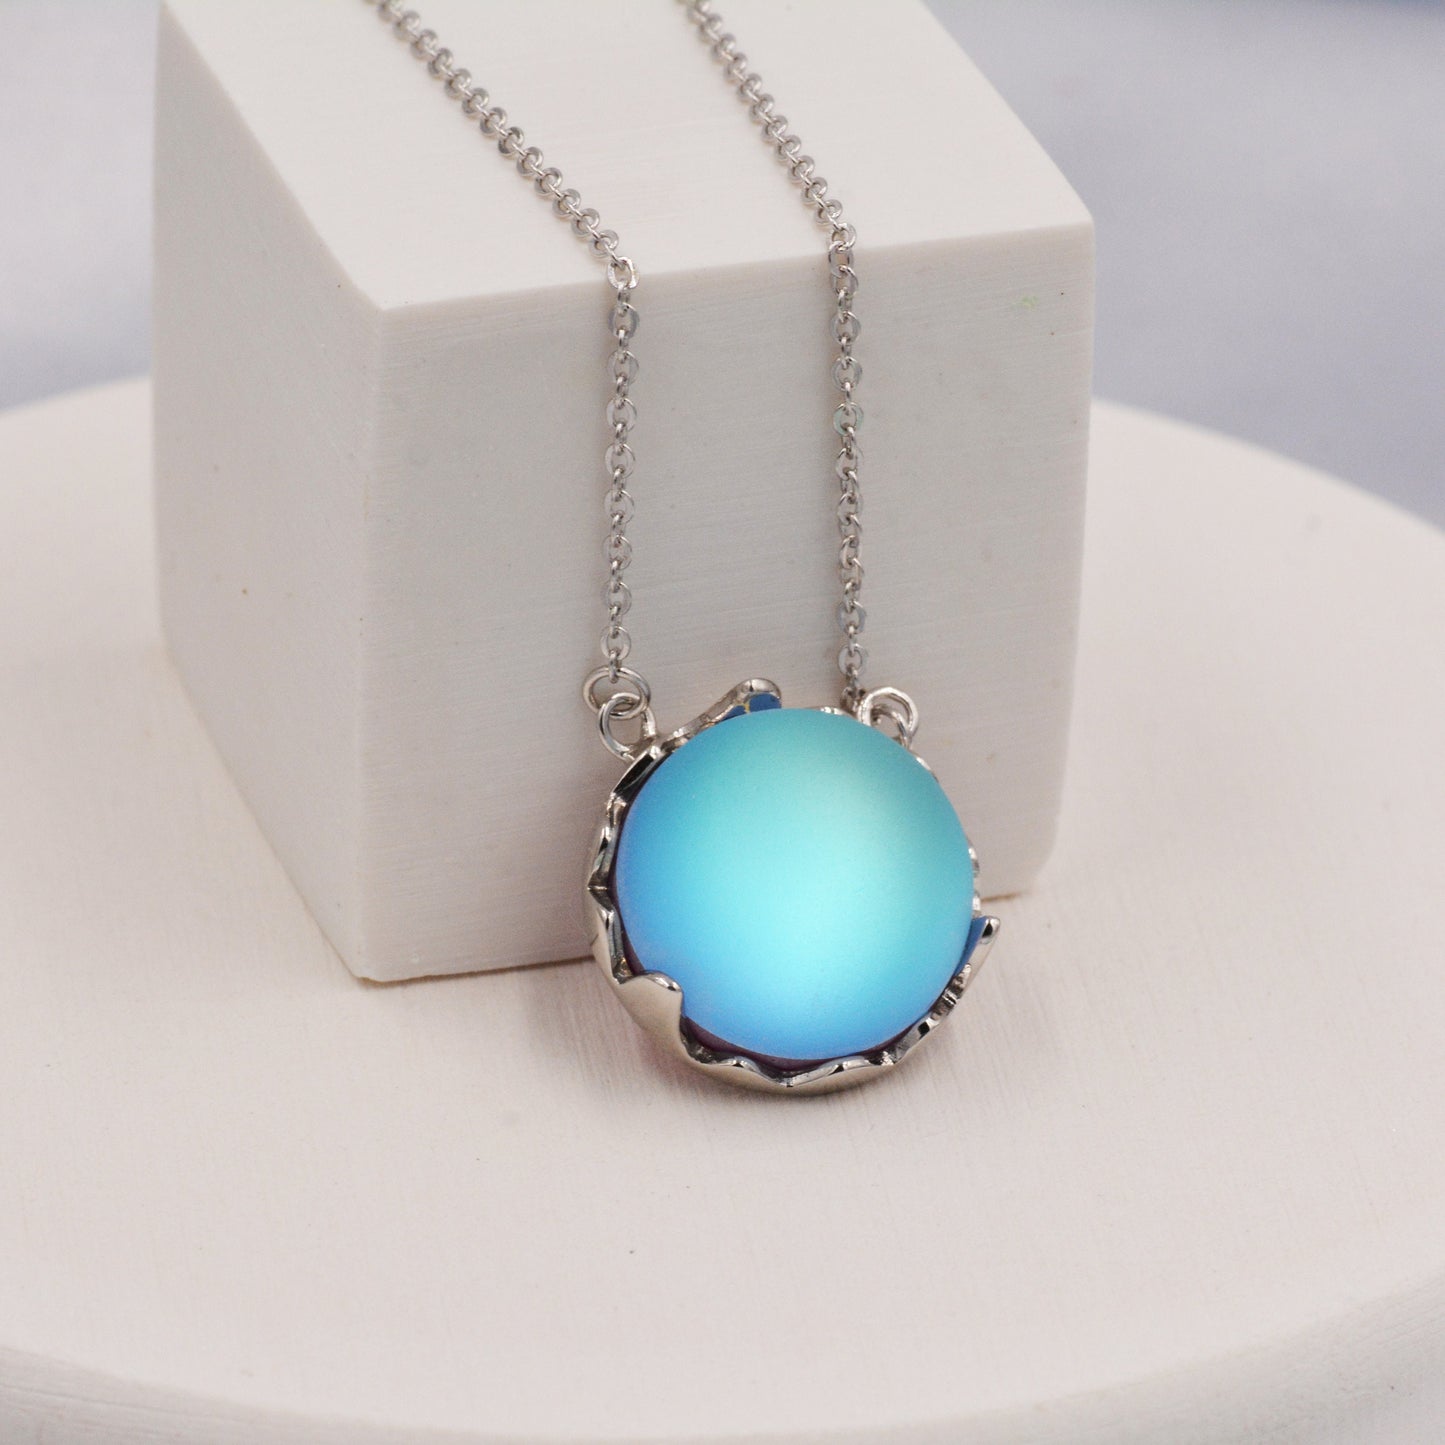 Blue Flash Moonstone Necklace in Sterling Silver, Aurora Northern Lights Bracelet with Blue Flash Simulated Moonstone